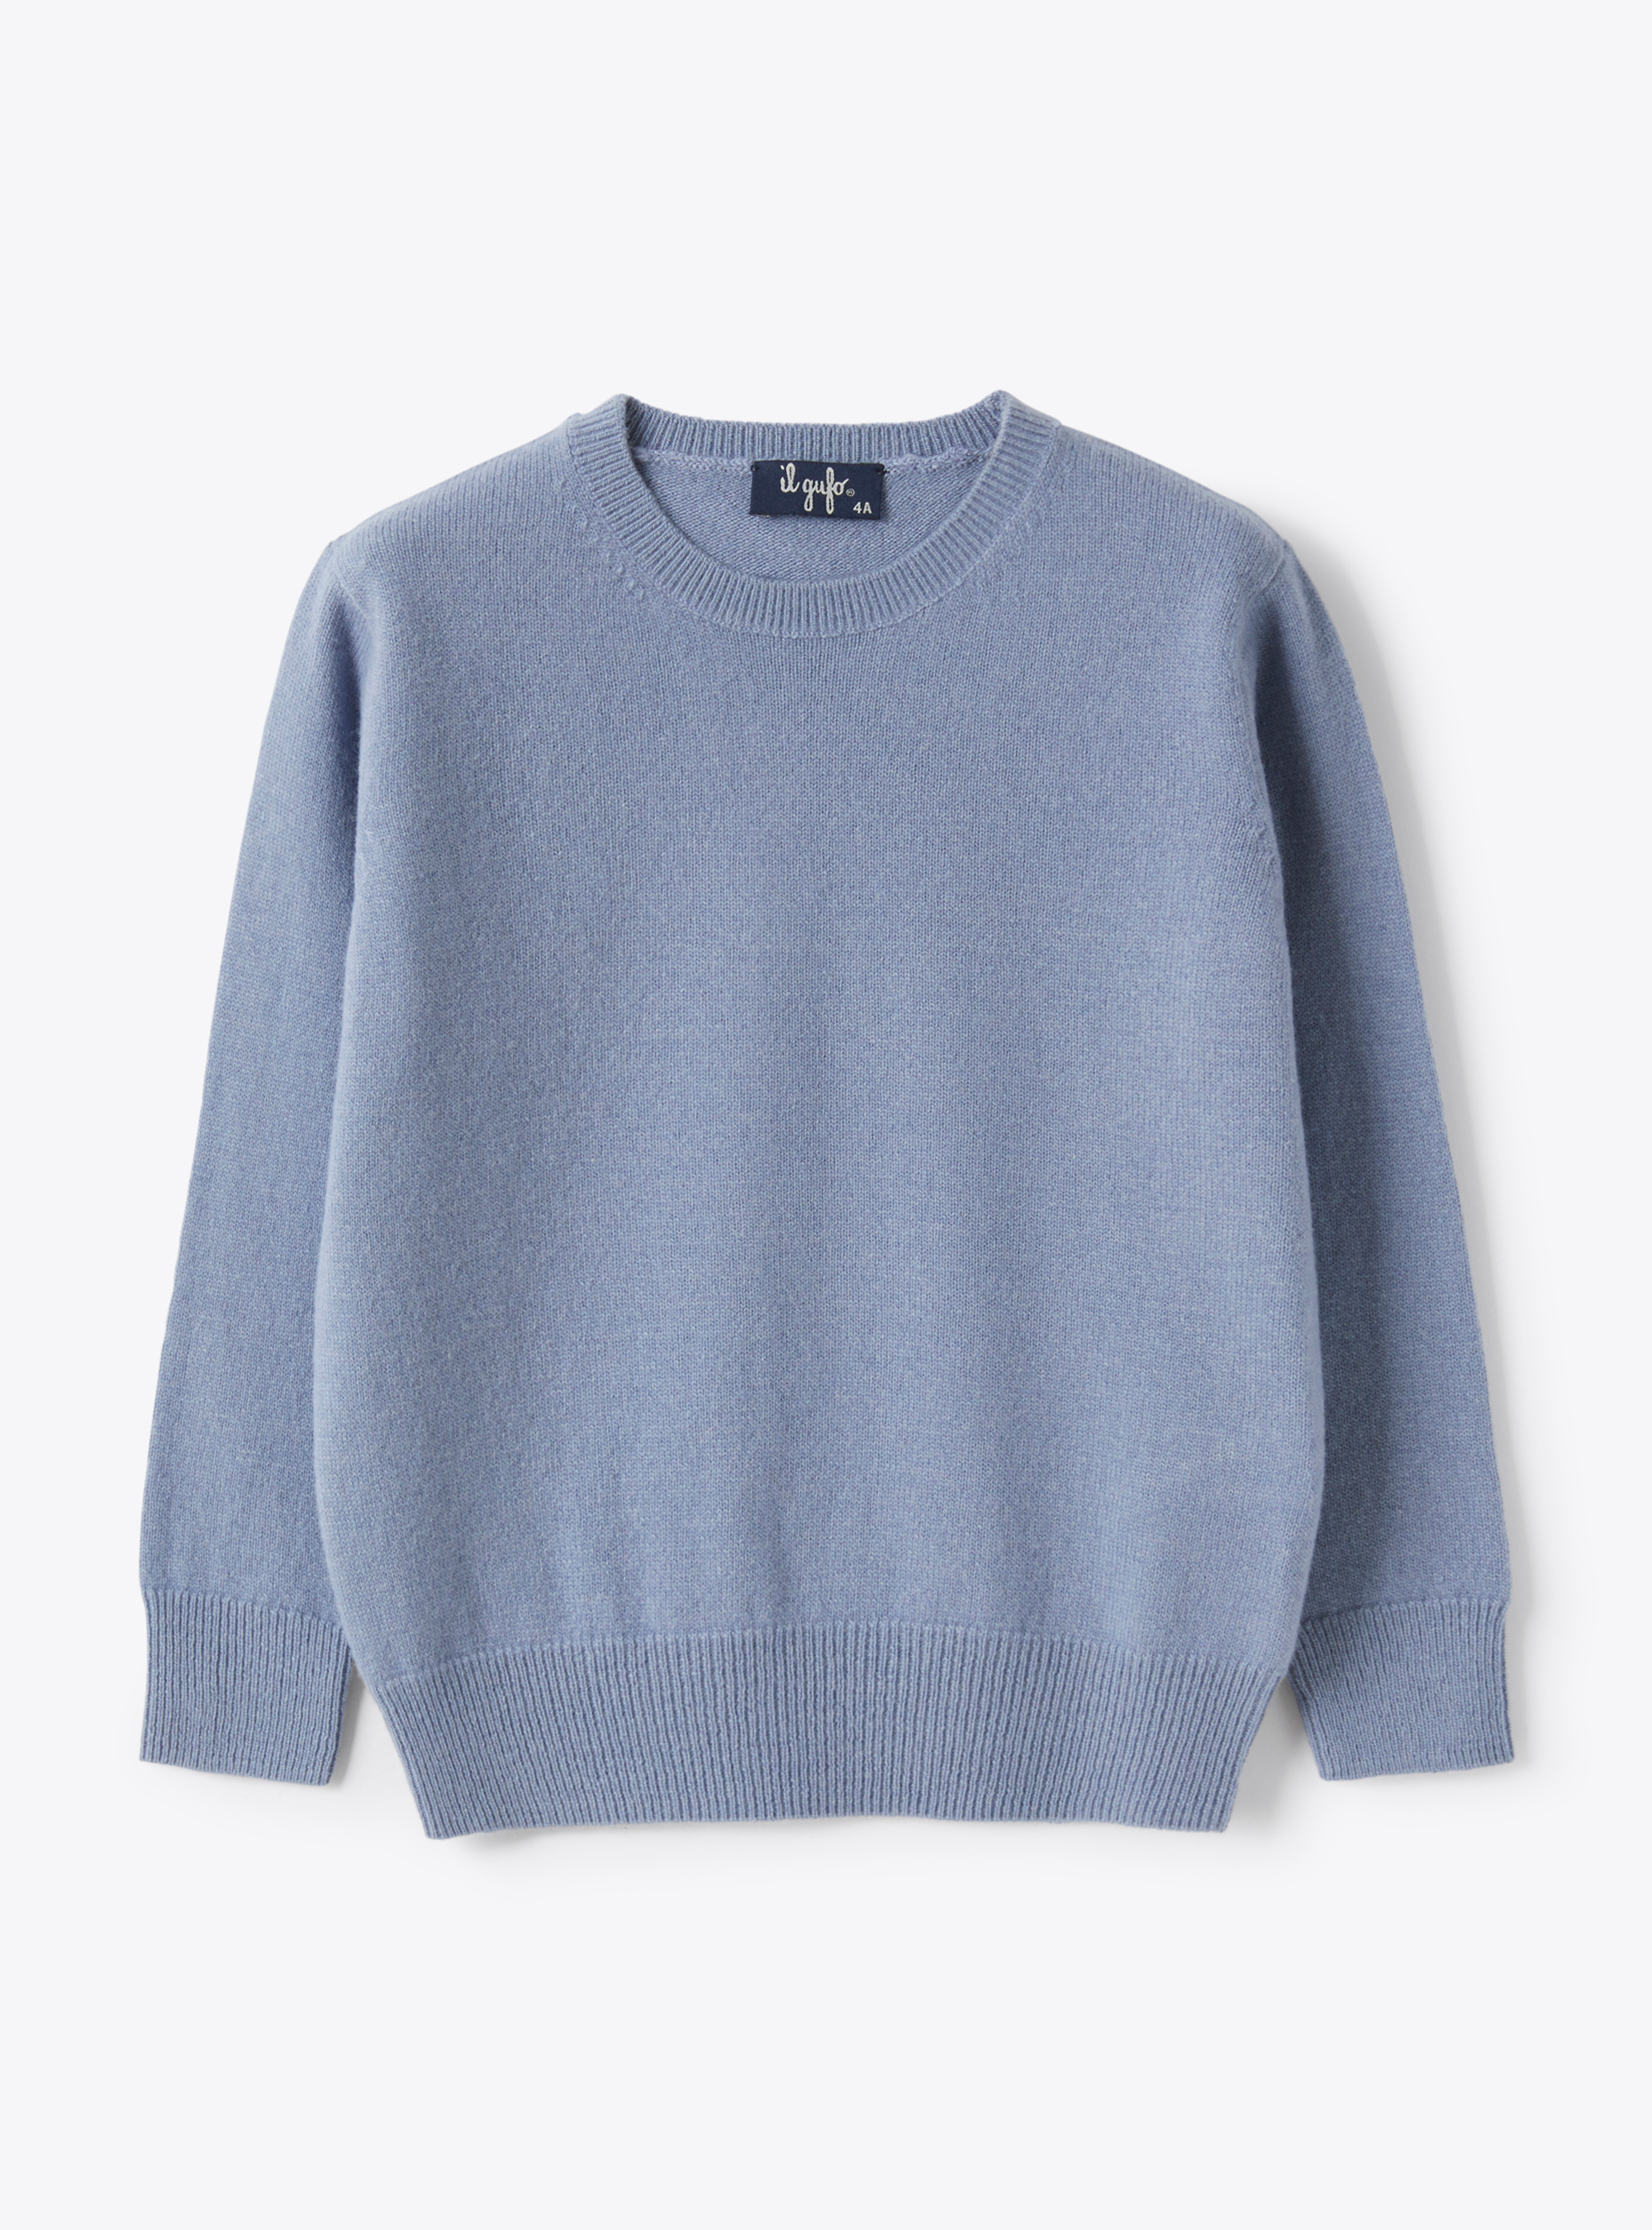 Violet crew neck wool sweater - Sweaters - Il Gufo